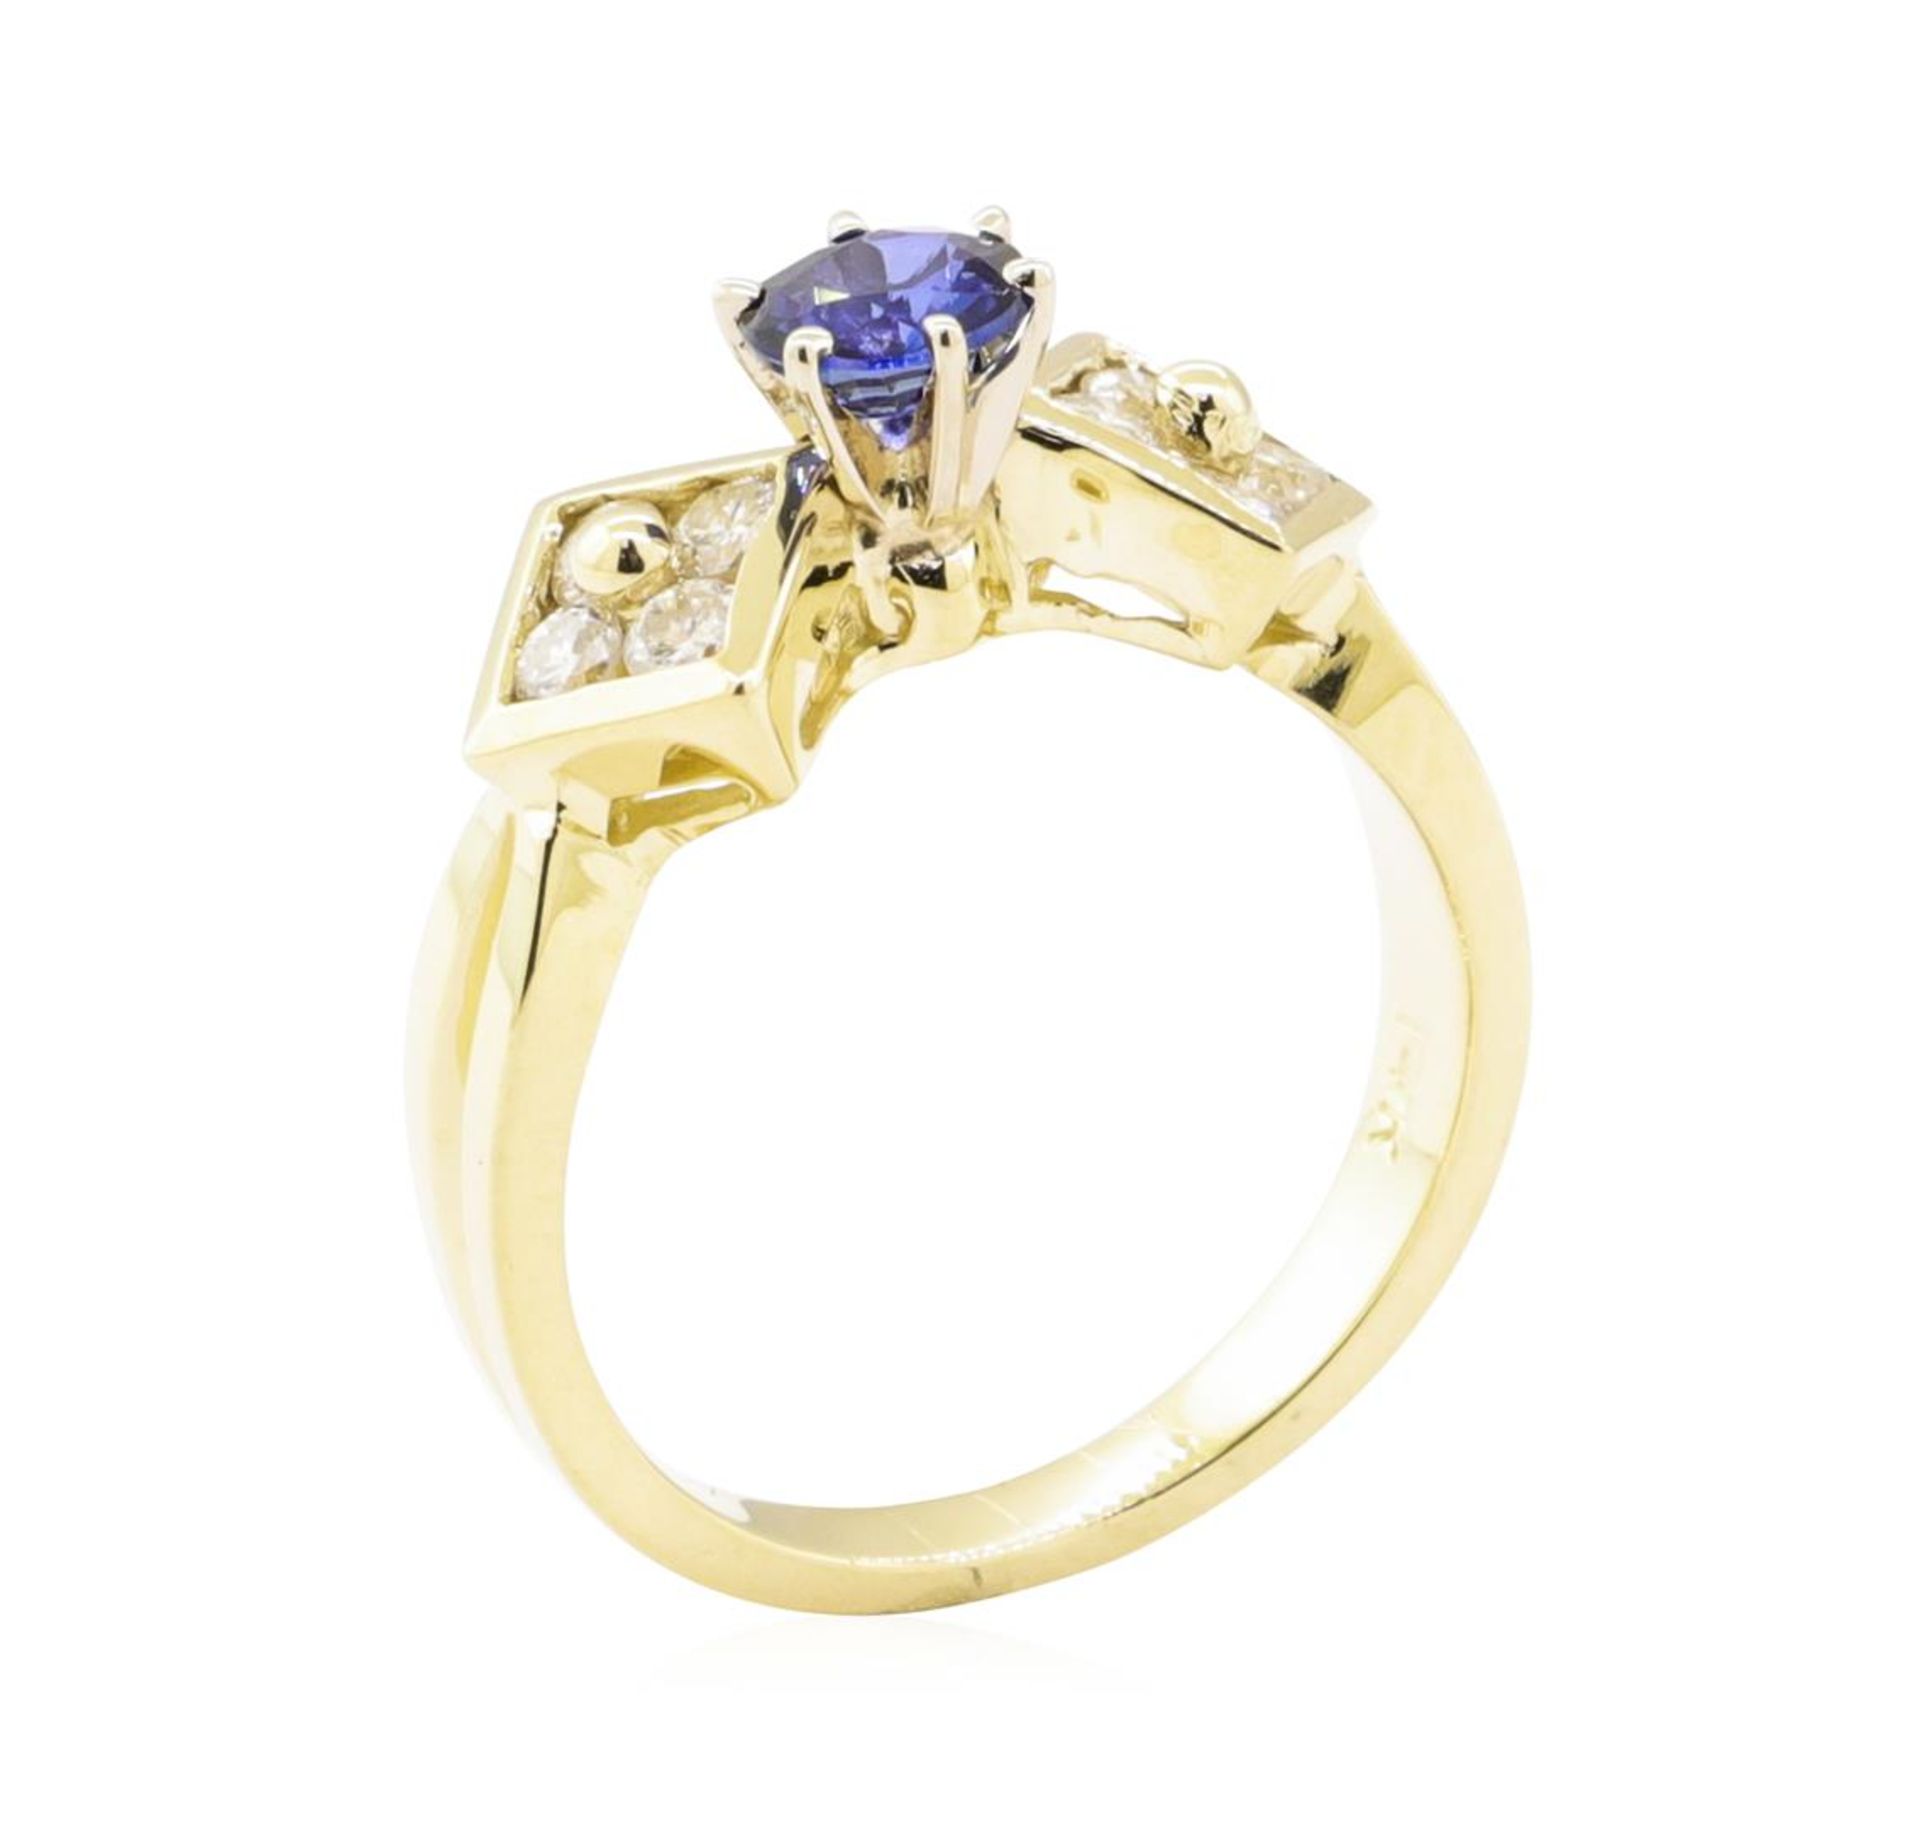 1.02 ctw Blue Sapphire and Diamond Ring - 14KT Yellow Gold - Image 4 of 4